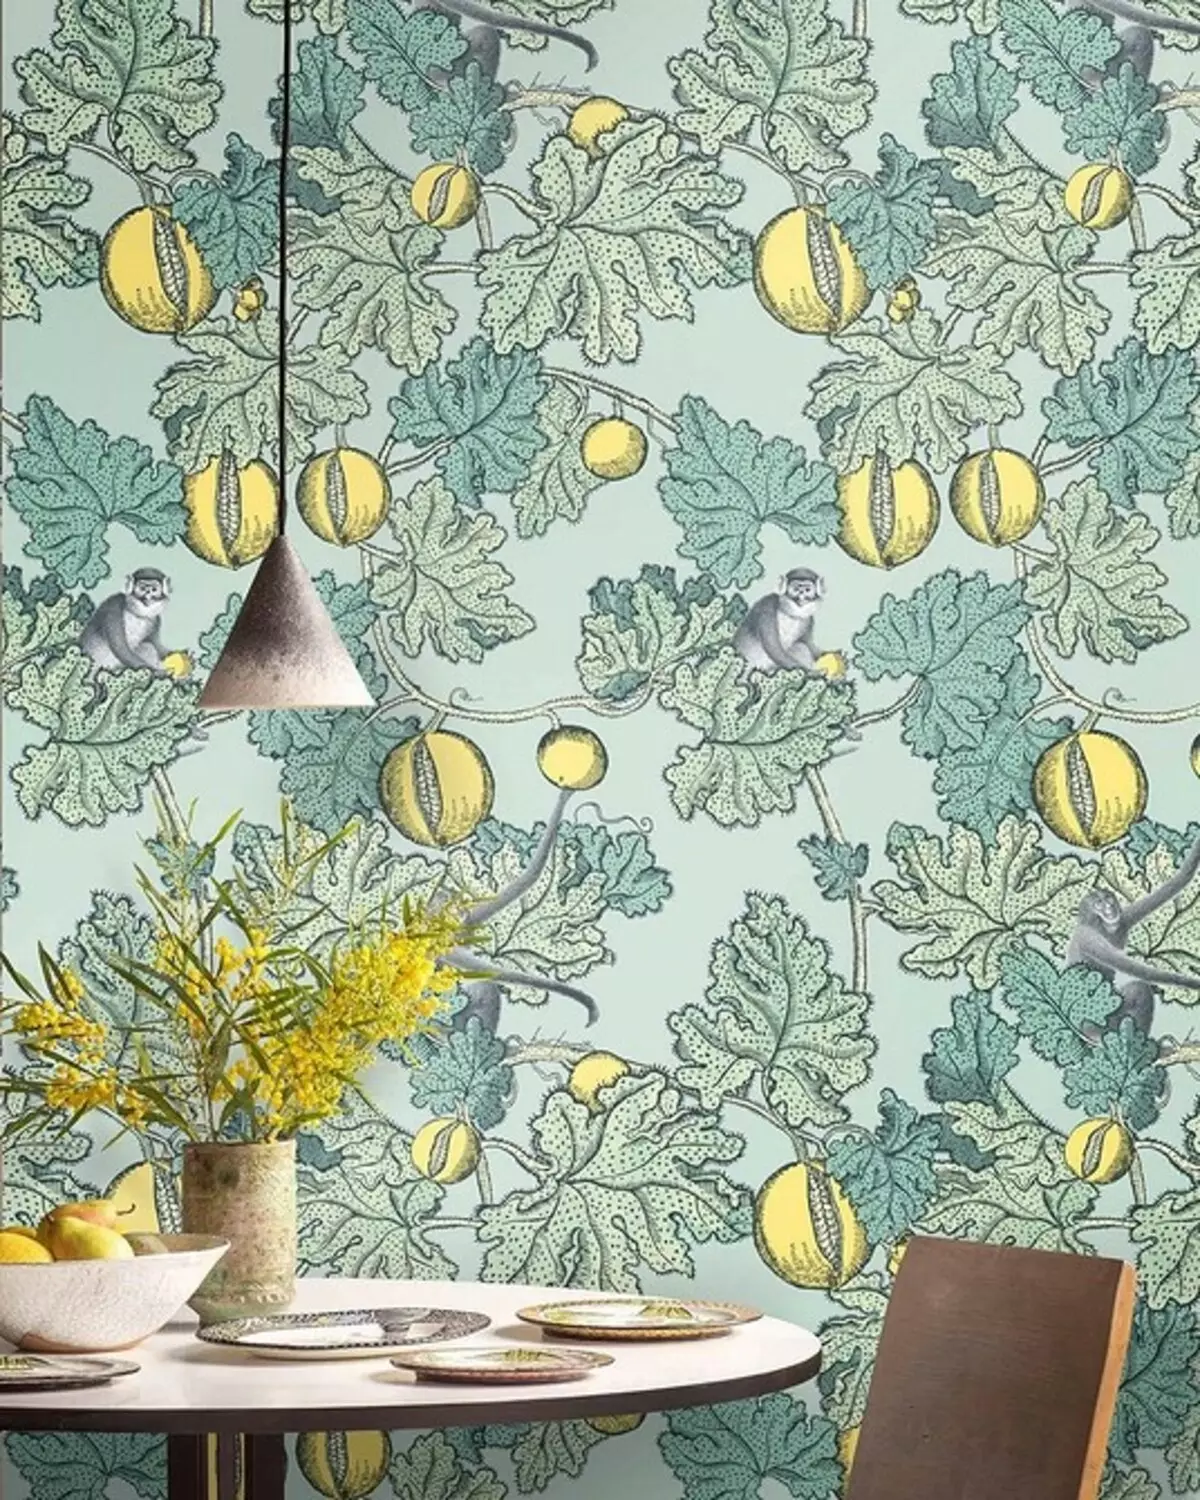 How to choose wallpaper in the living room, observing the interior design rules 9985_23